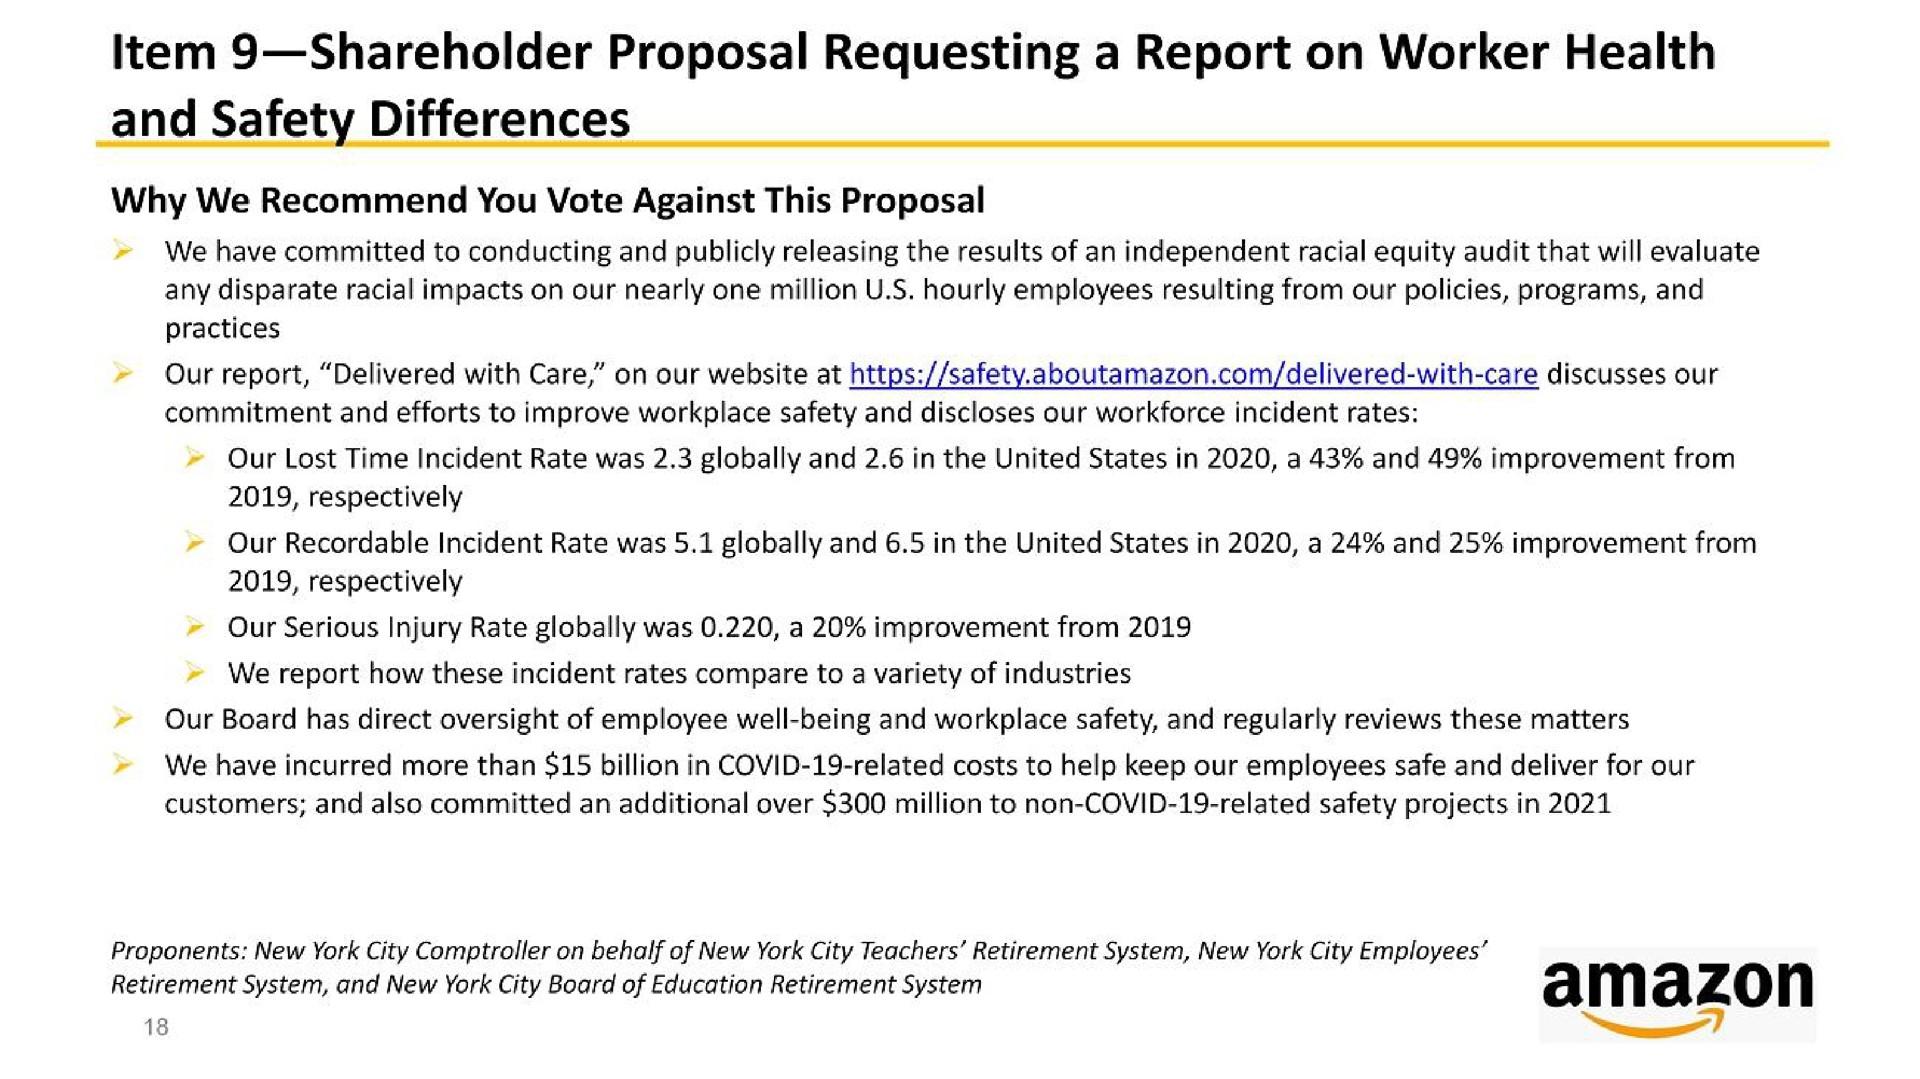 item shareholder proposal requesting a report on worker health and safety differences | Amazon